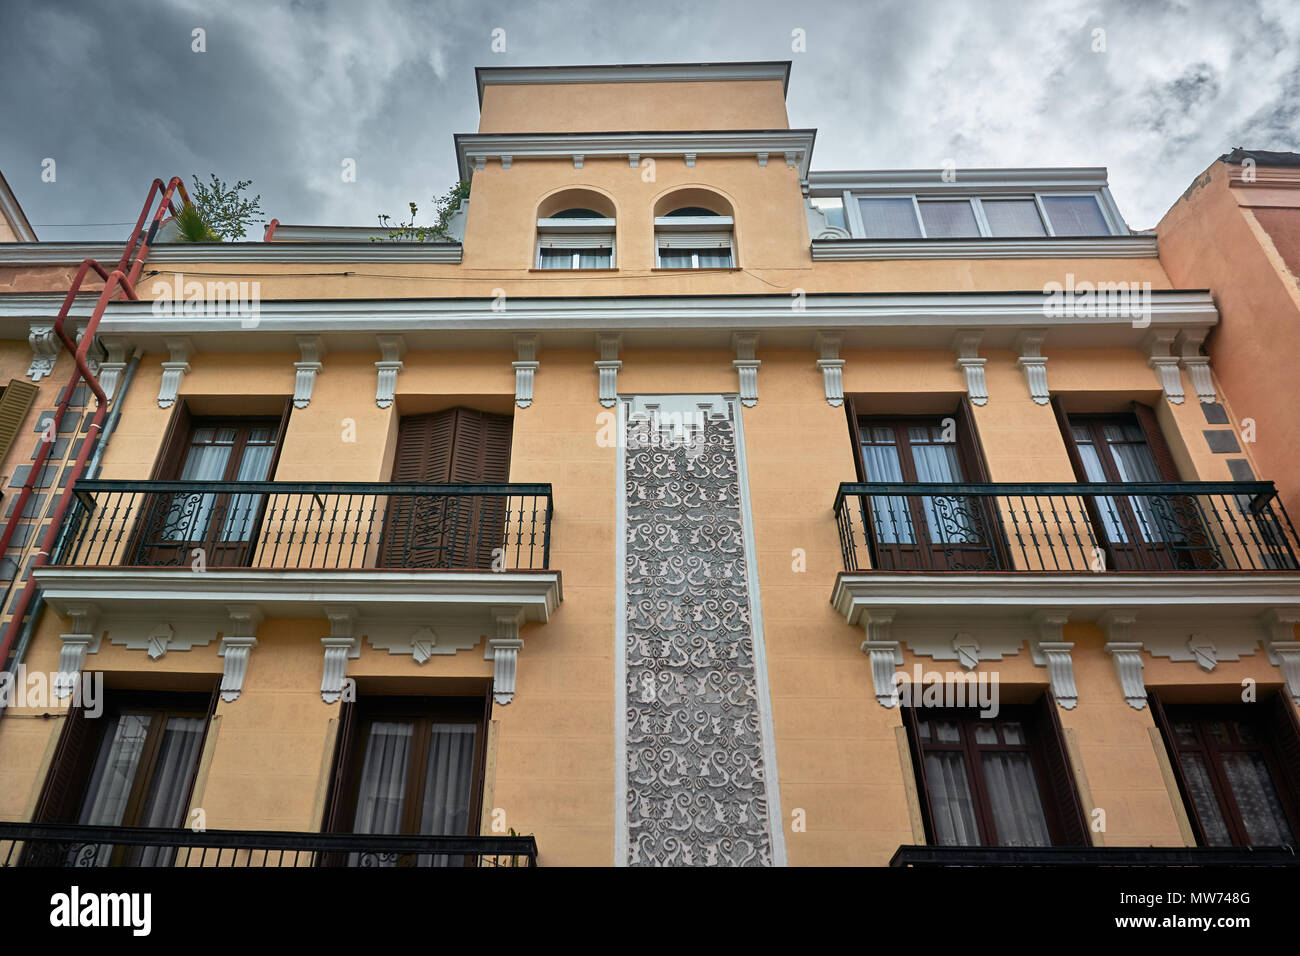 MADRID, SPAIN - APRIL 23, 2018: Details of a generic picturesque building on a street in 'La Latina', a famous neighborhood in Madrid, Spain. Stock Photo